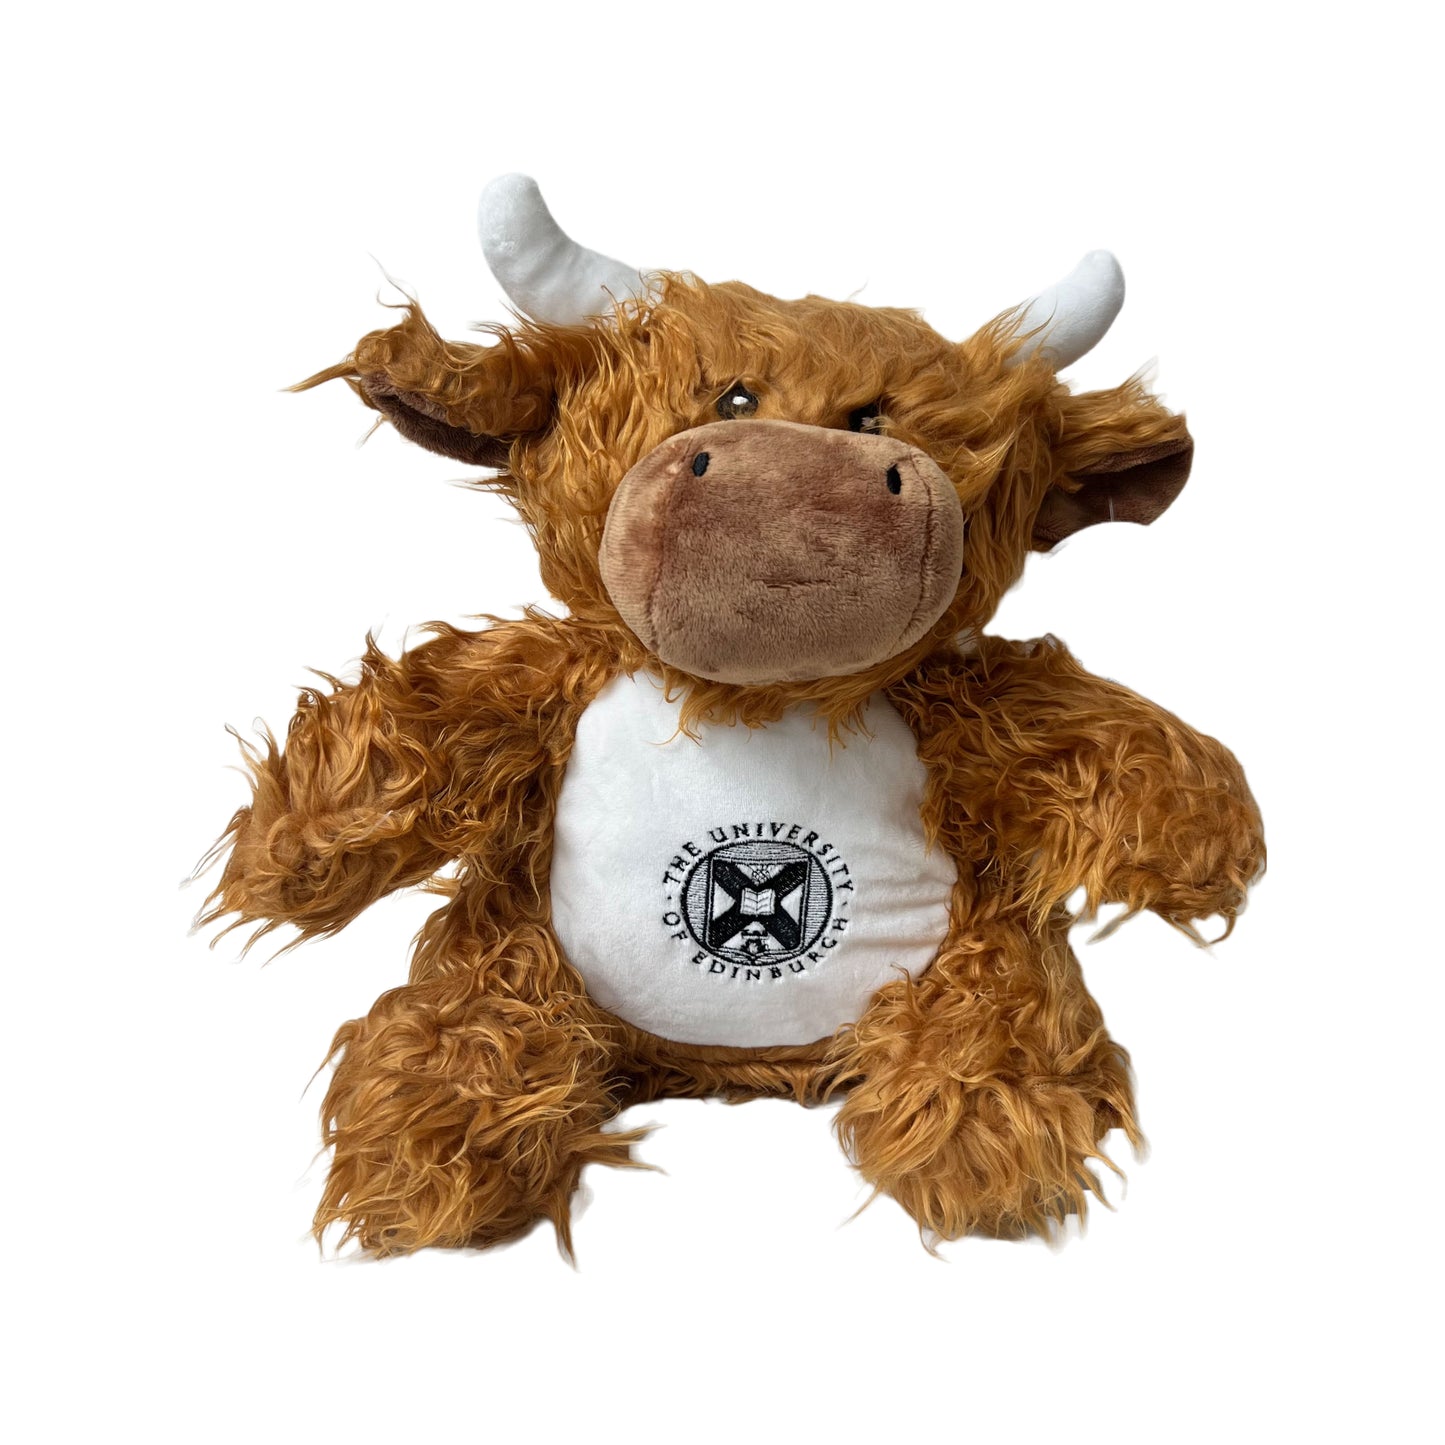 Highland cow plush toy with the university crest embroidered in black 